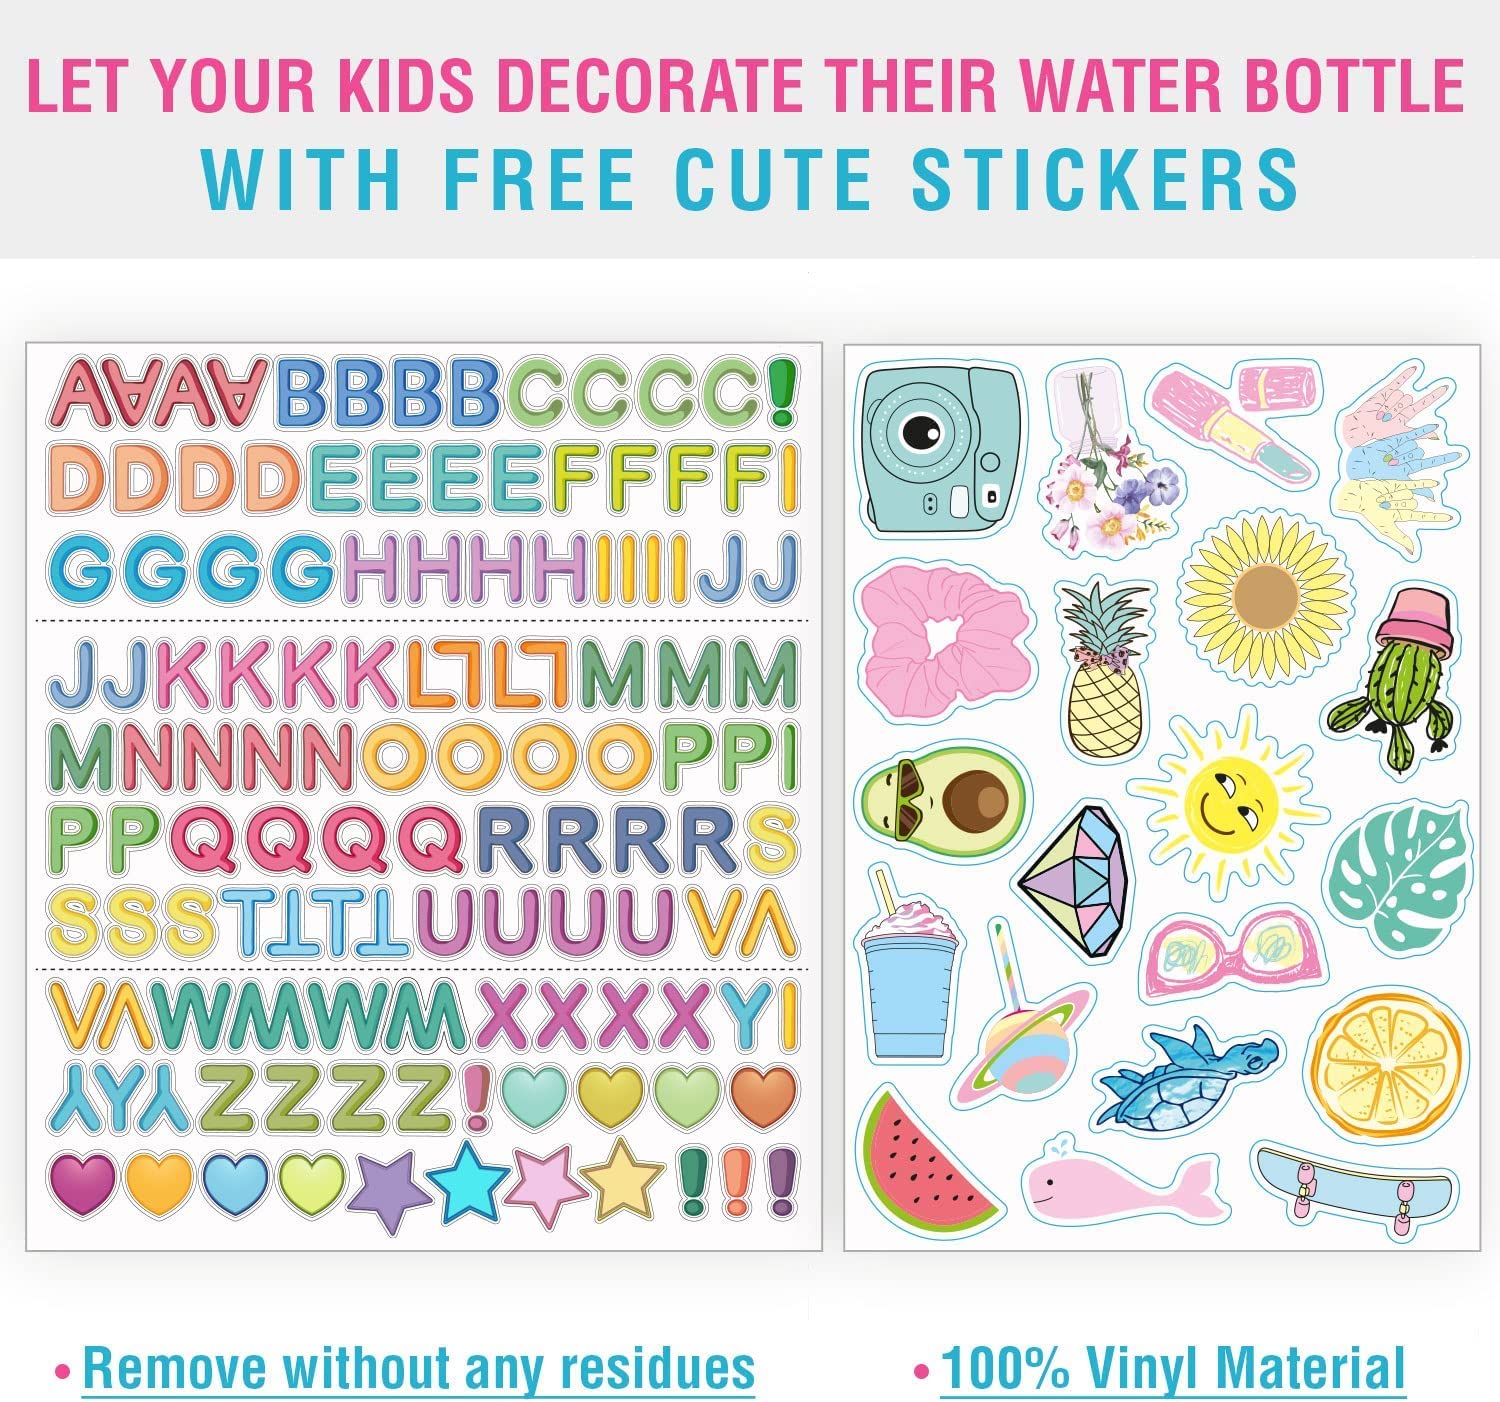 CHILLOUT LIFE 12 oz Kids Insulated Water Bottle for School with Straw Lid Leakproof and Cute Waterproof Stickers, Personalized Stainless Steel Thermos Flask Metal Water Bottle for Girls & Boys